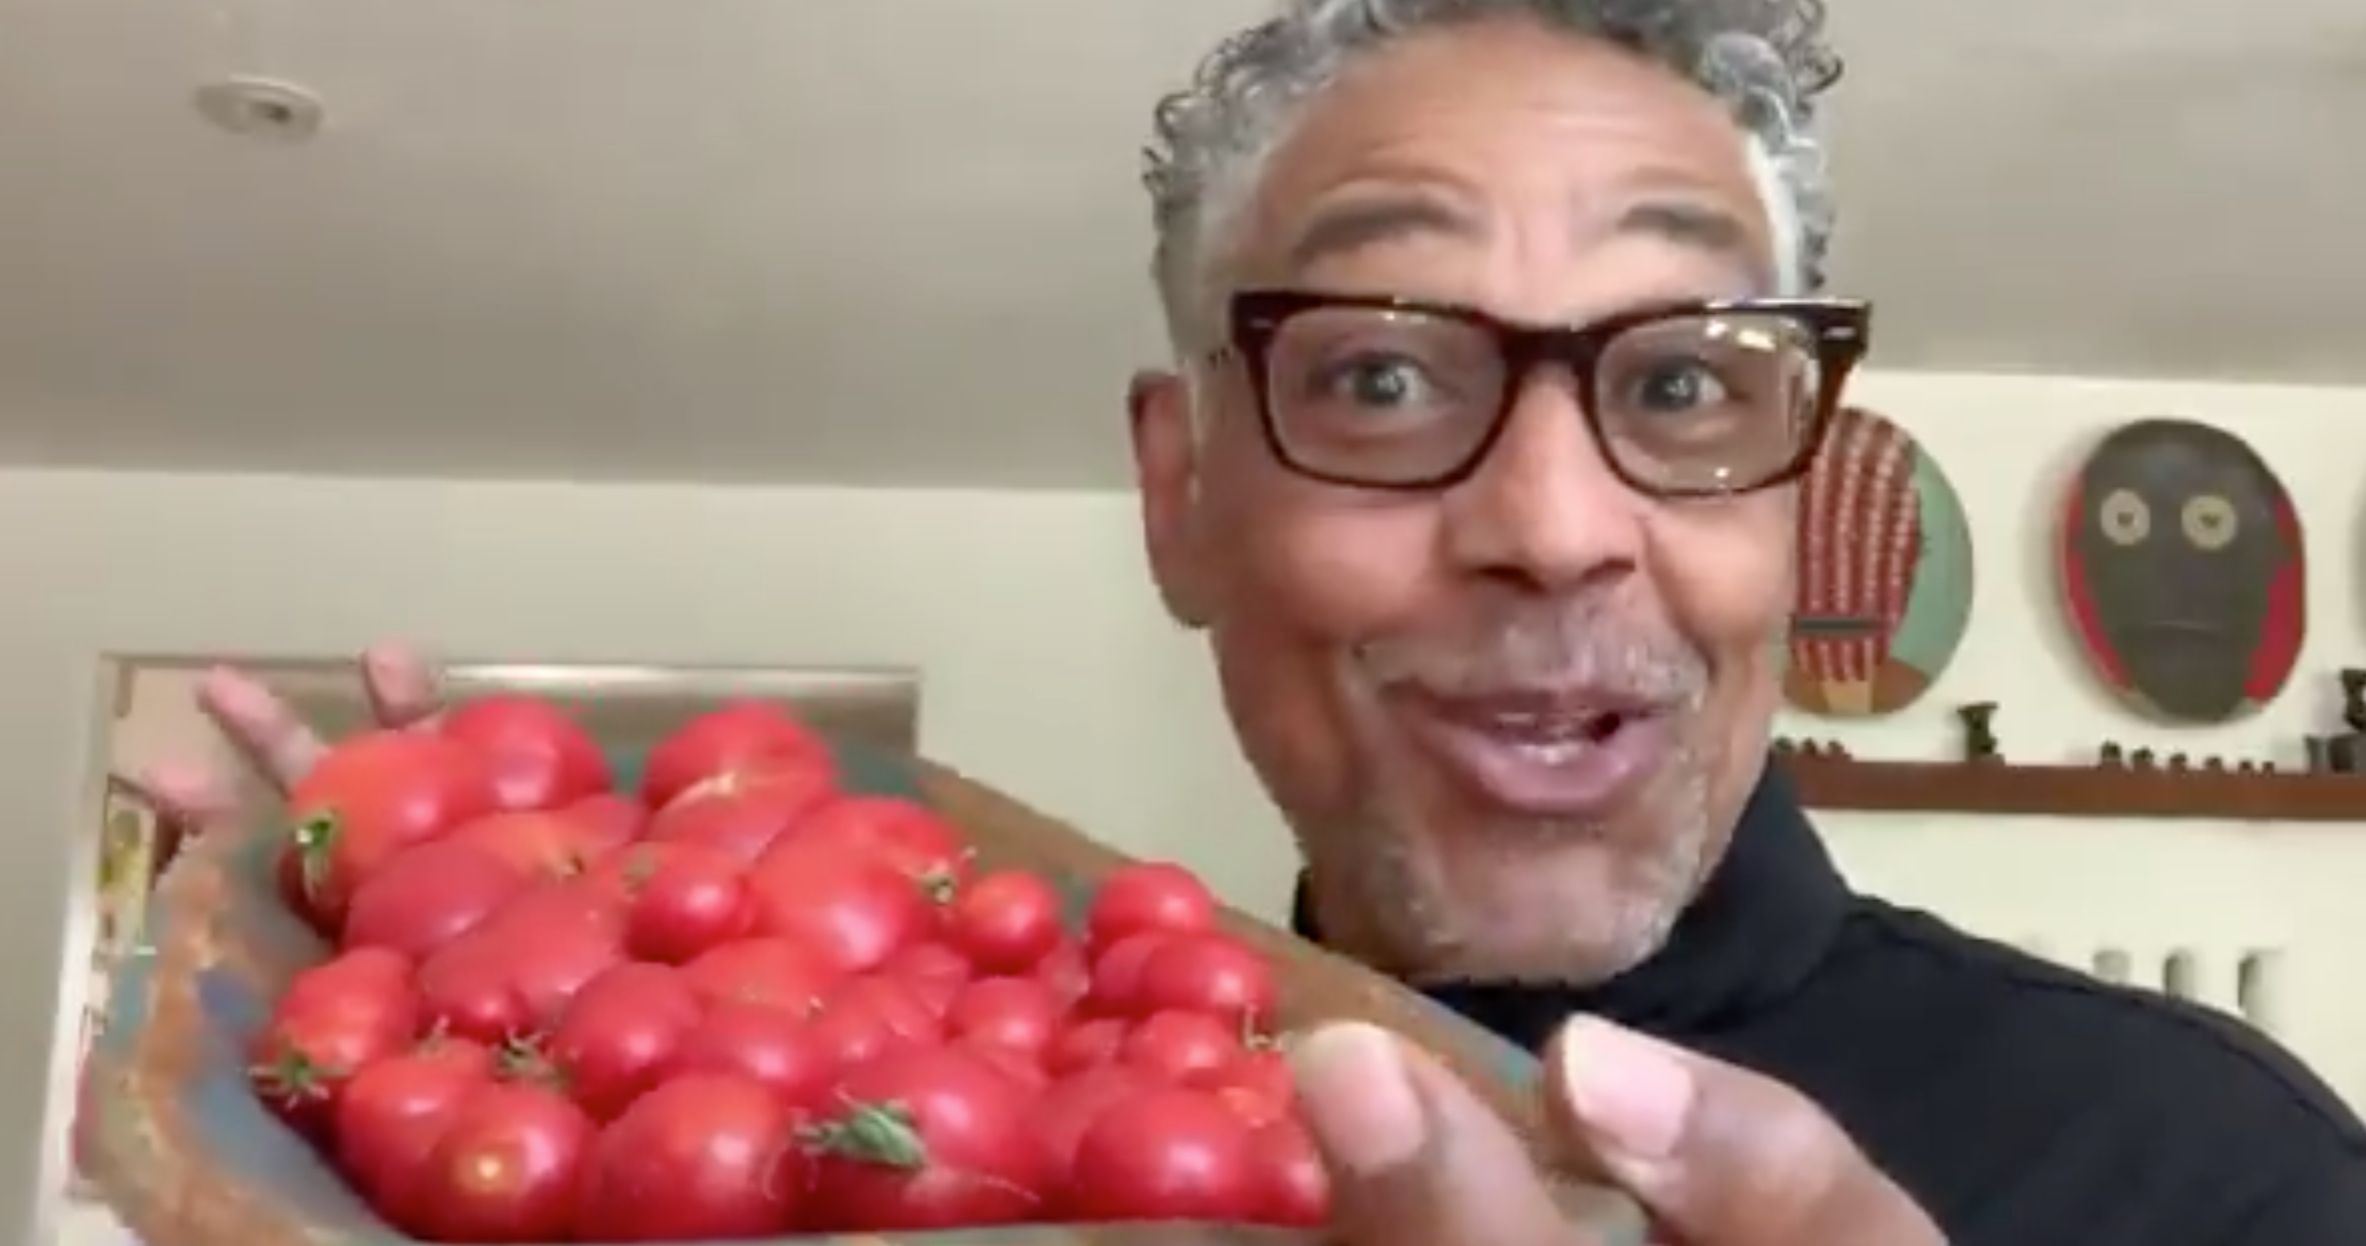 The Boys Season 2 Is 97% Fresh and Giancarlo Esposito Is Celebrating with Tomatoes